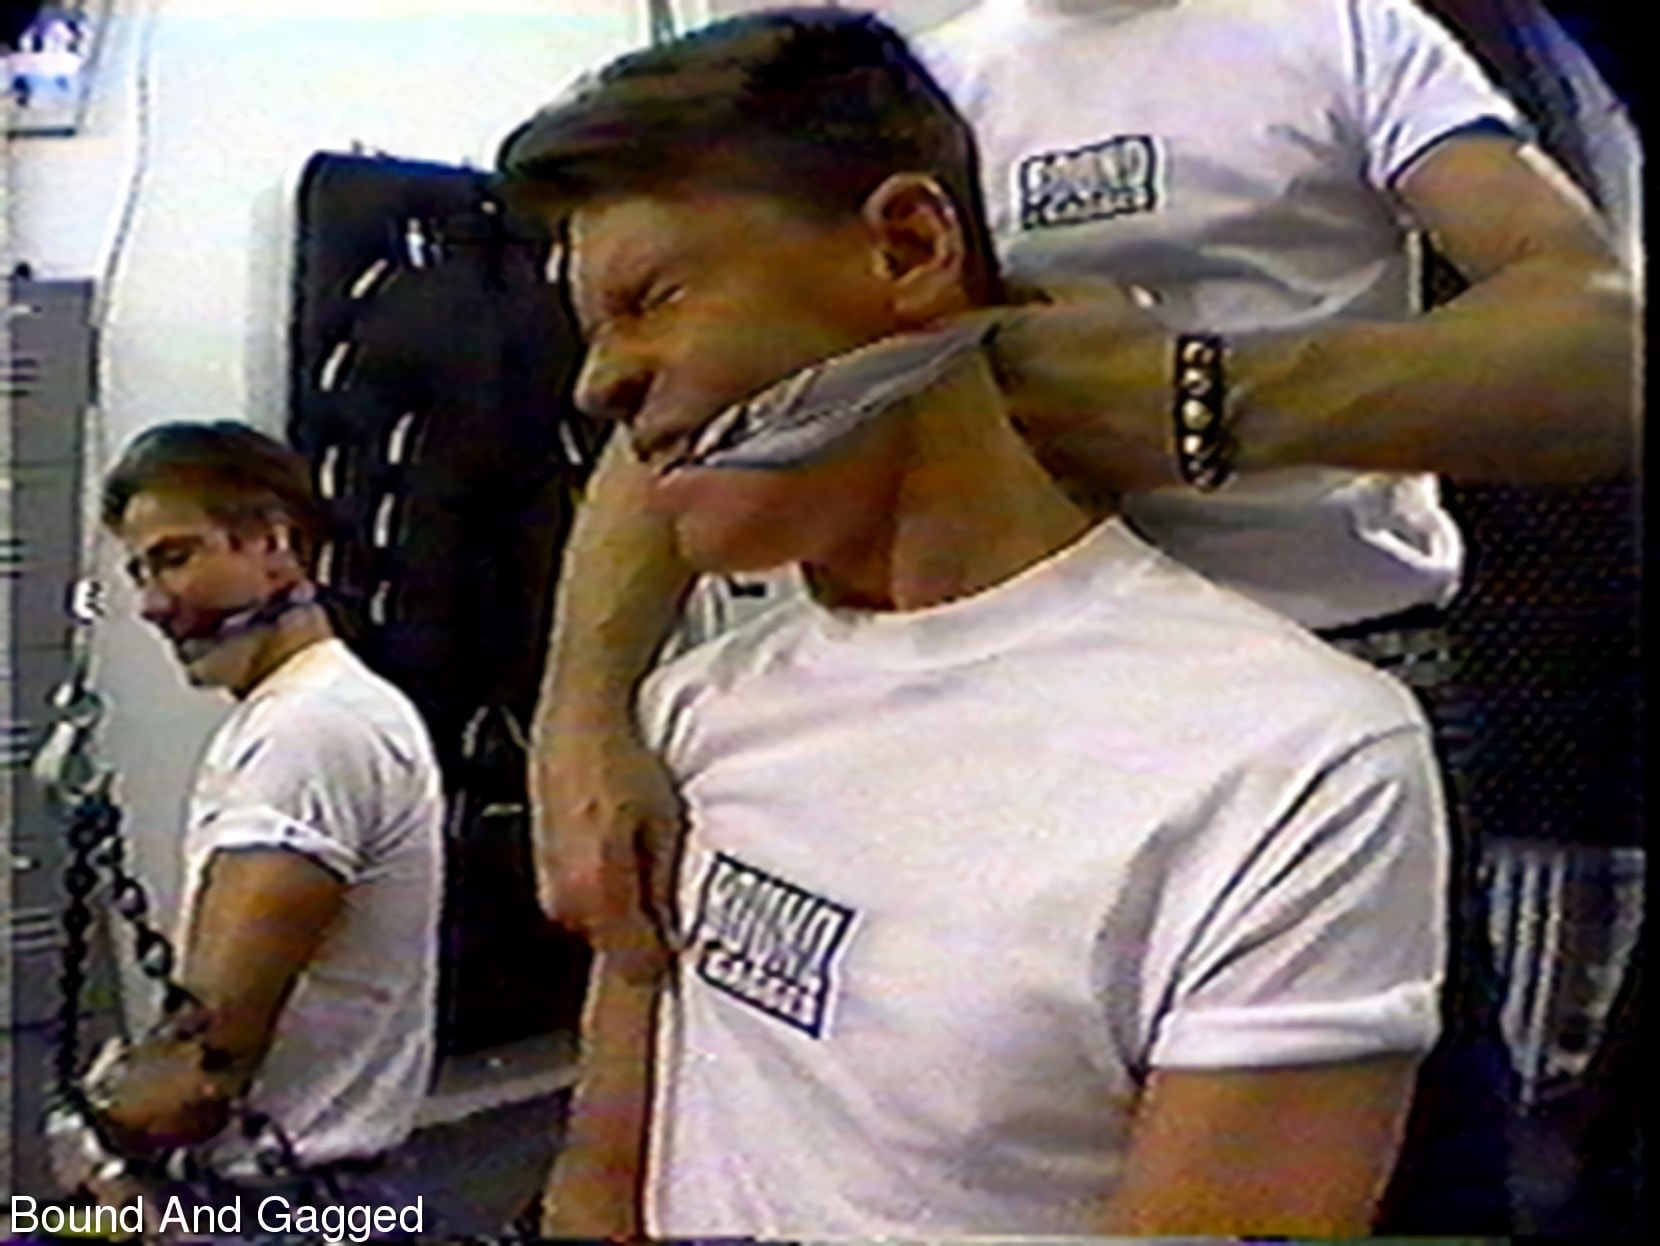 Kink Partners Gay 'Bound and Gagged: The Video - Three Guys Horsing Around' starring Bob Phillips (Photo 4)